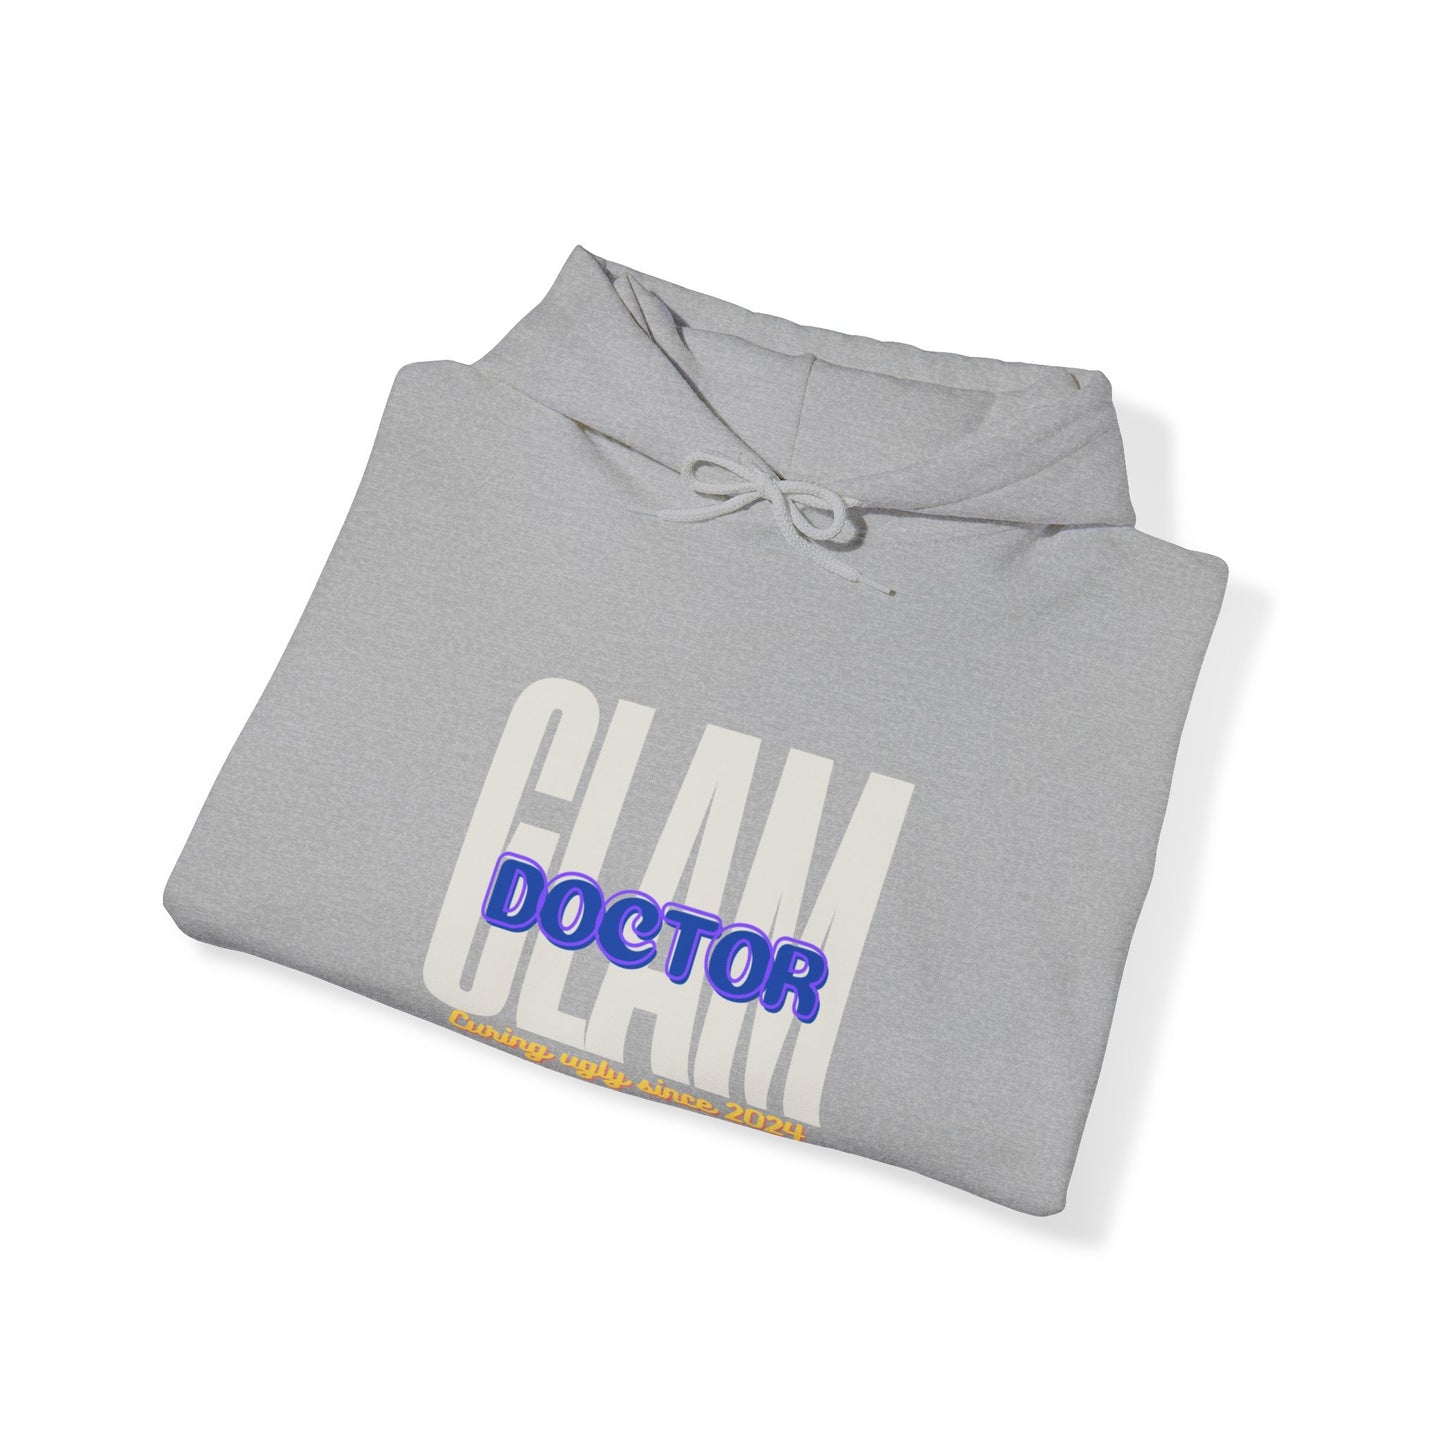 Dr. Glam